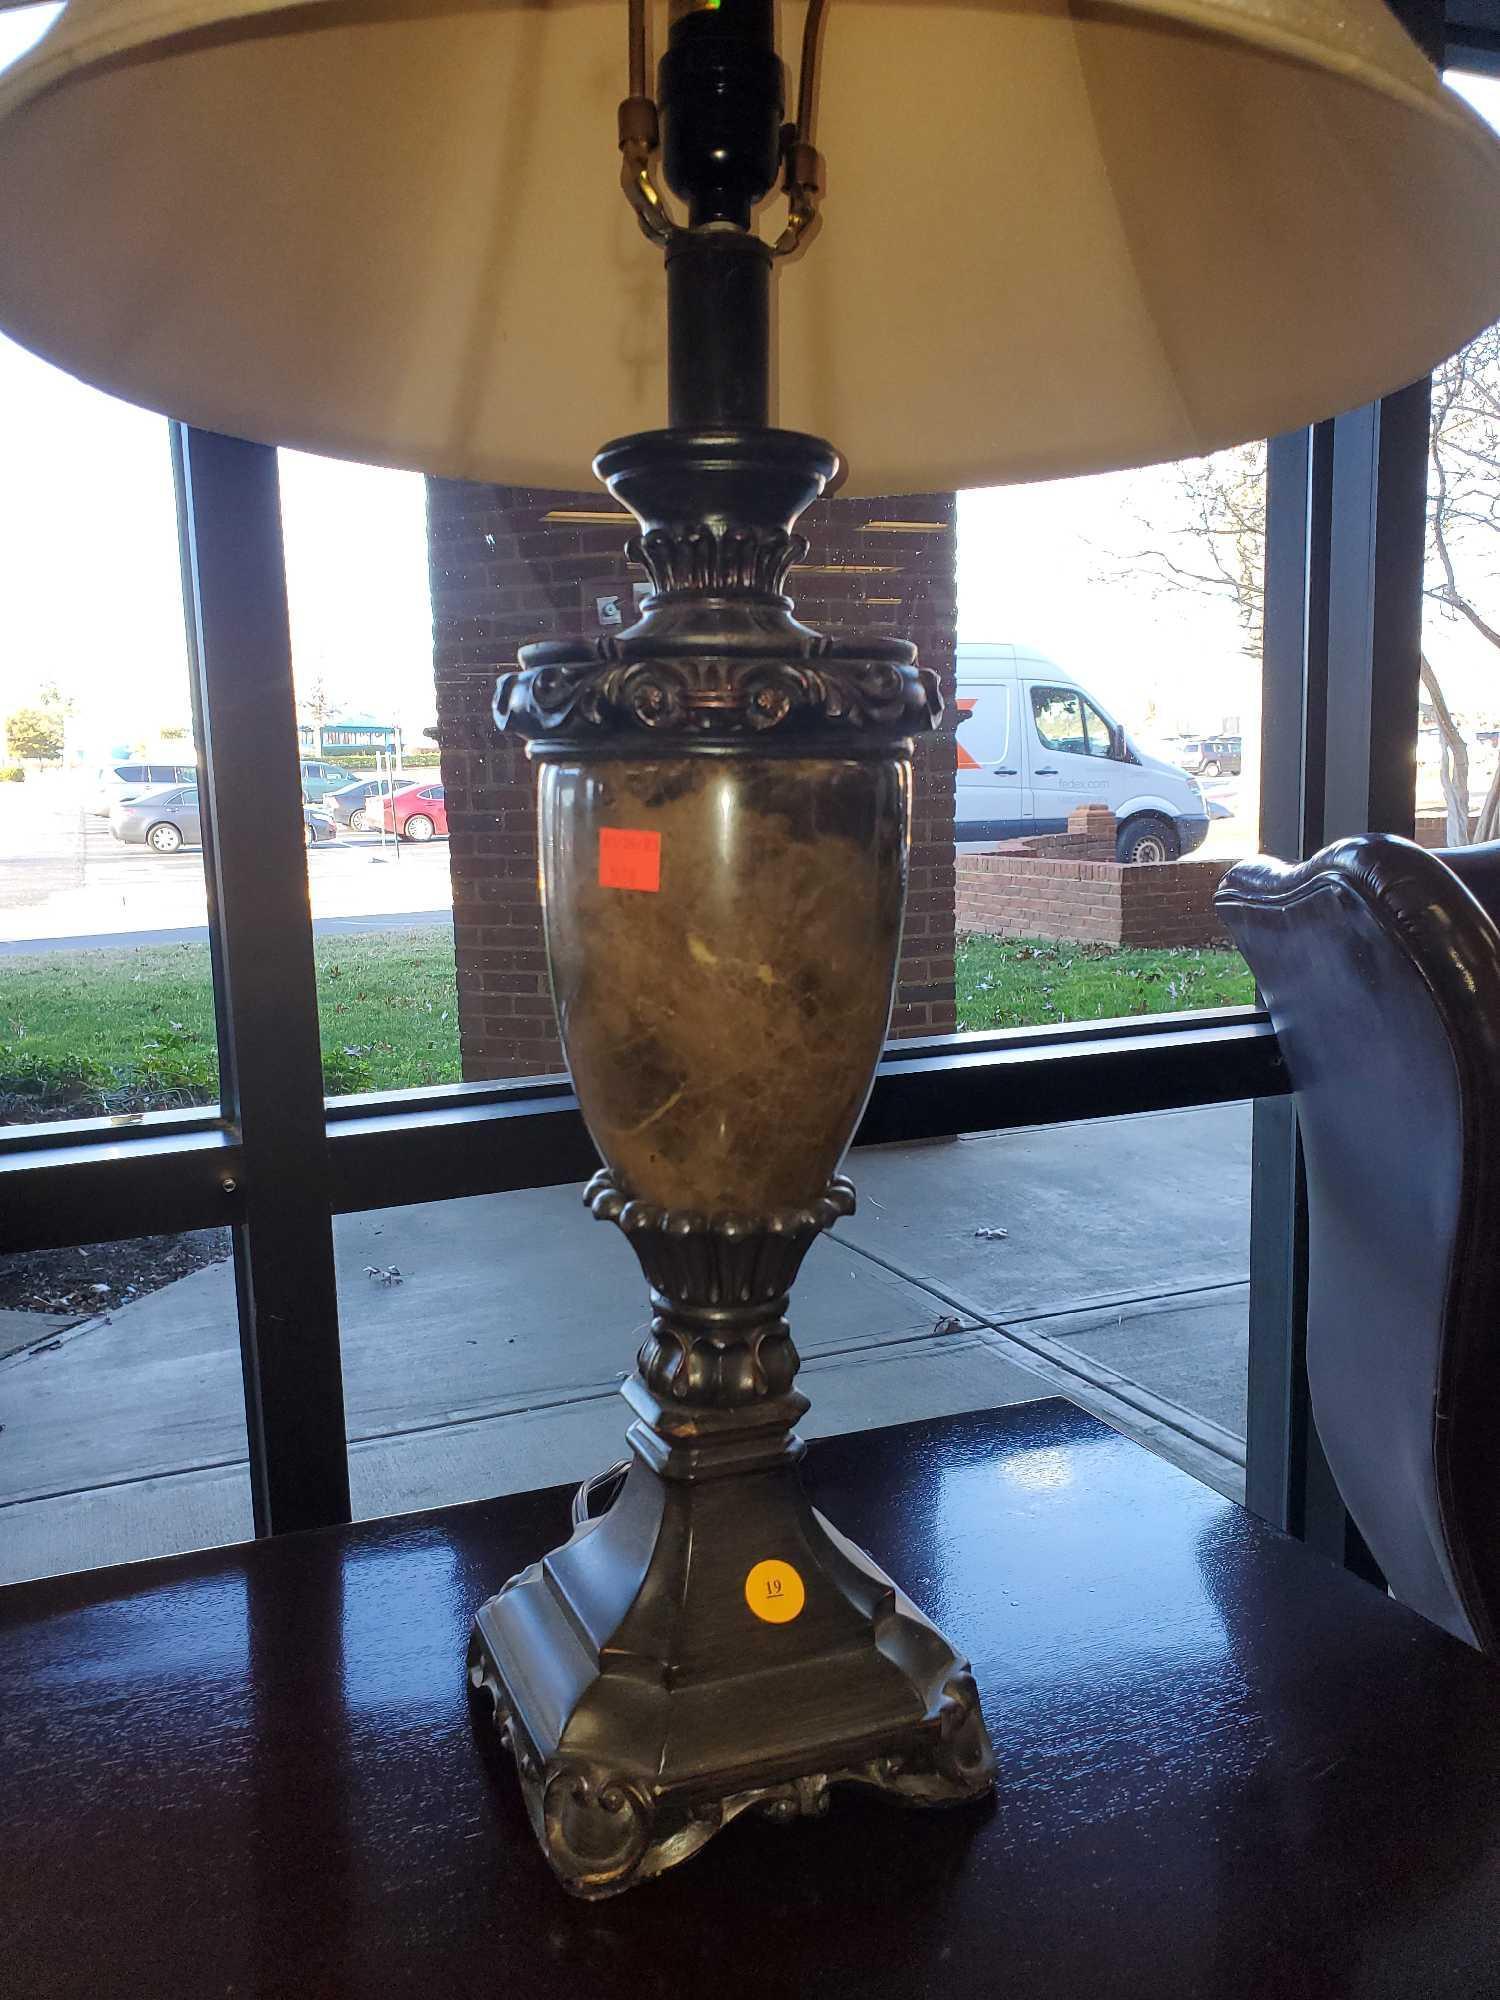 ALLEN + ROTH 21-in BRONZE PLUG-IN 3-WAY RESIN STICK LAMP BASE, HAS A CREAM SHADE.